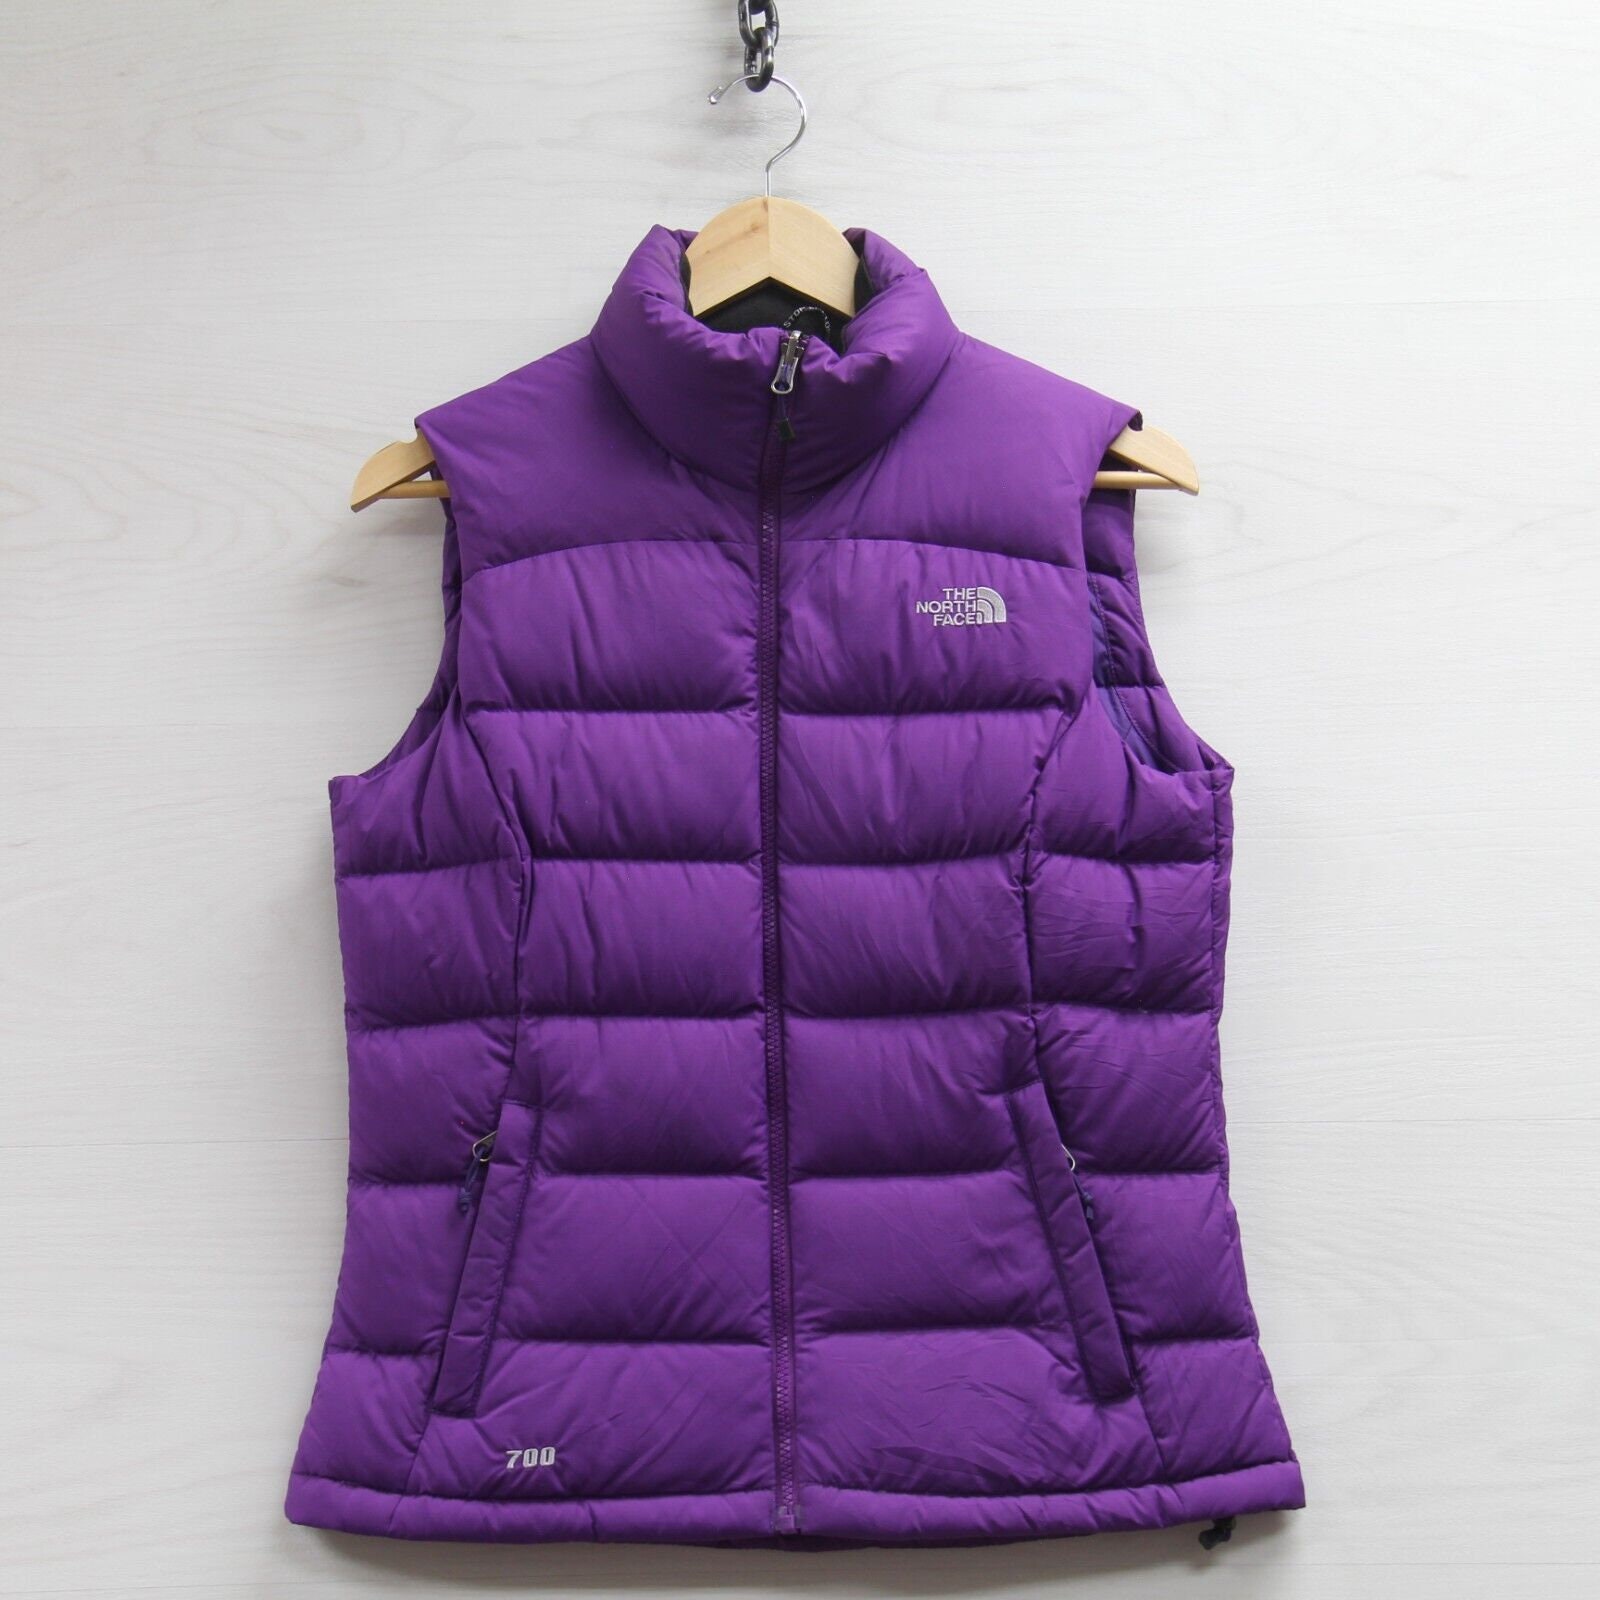 The North Face Puffer Vest Jacket Womens Size Small Purple 700 - Etsy